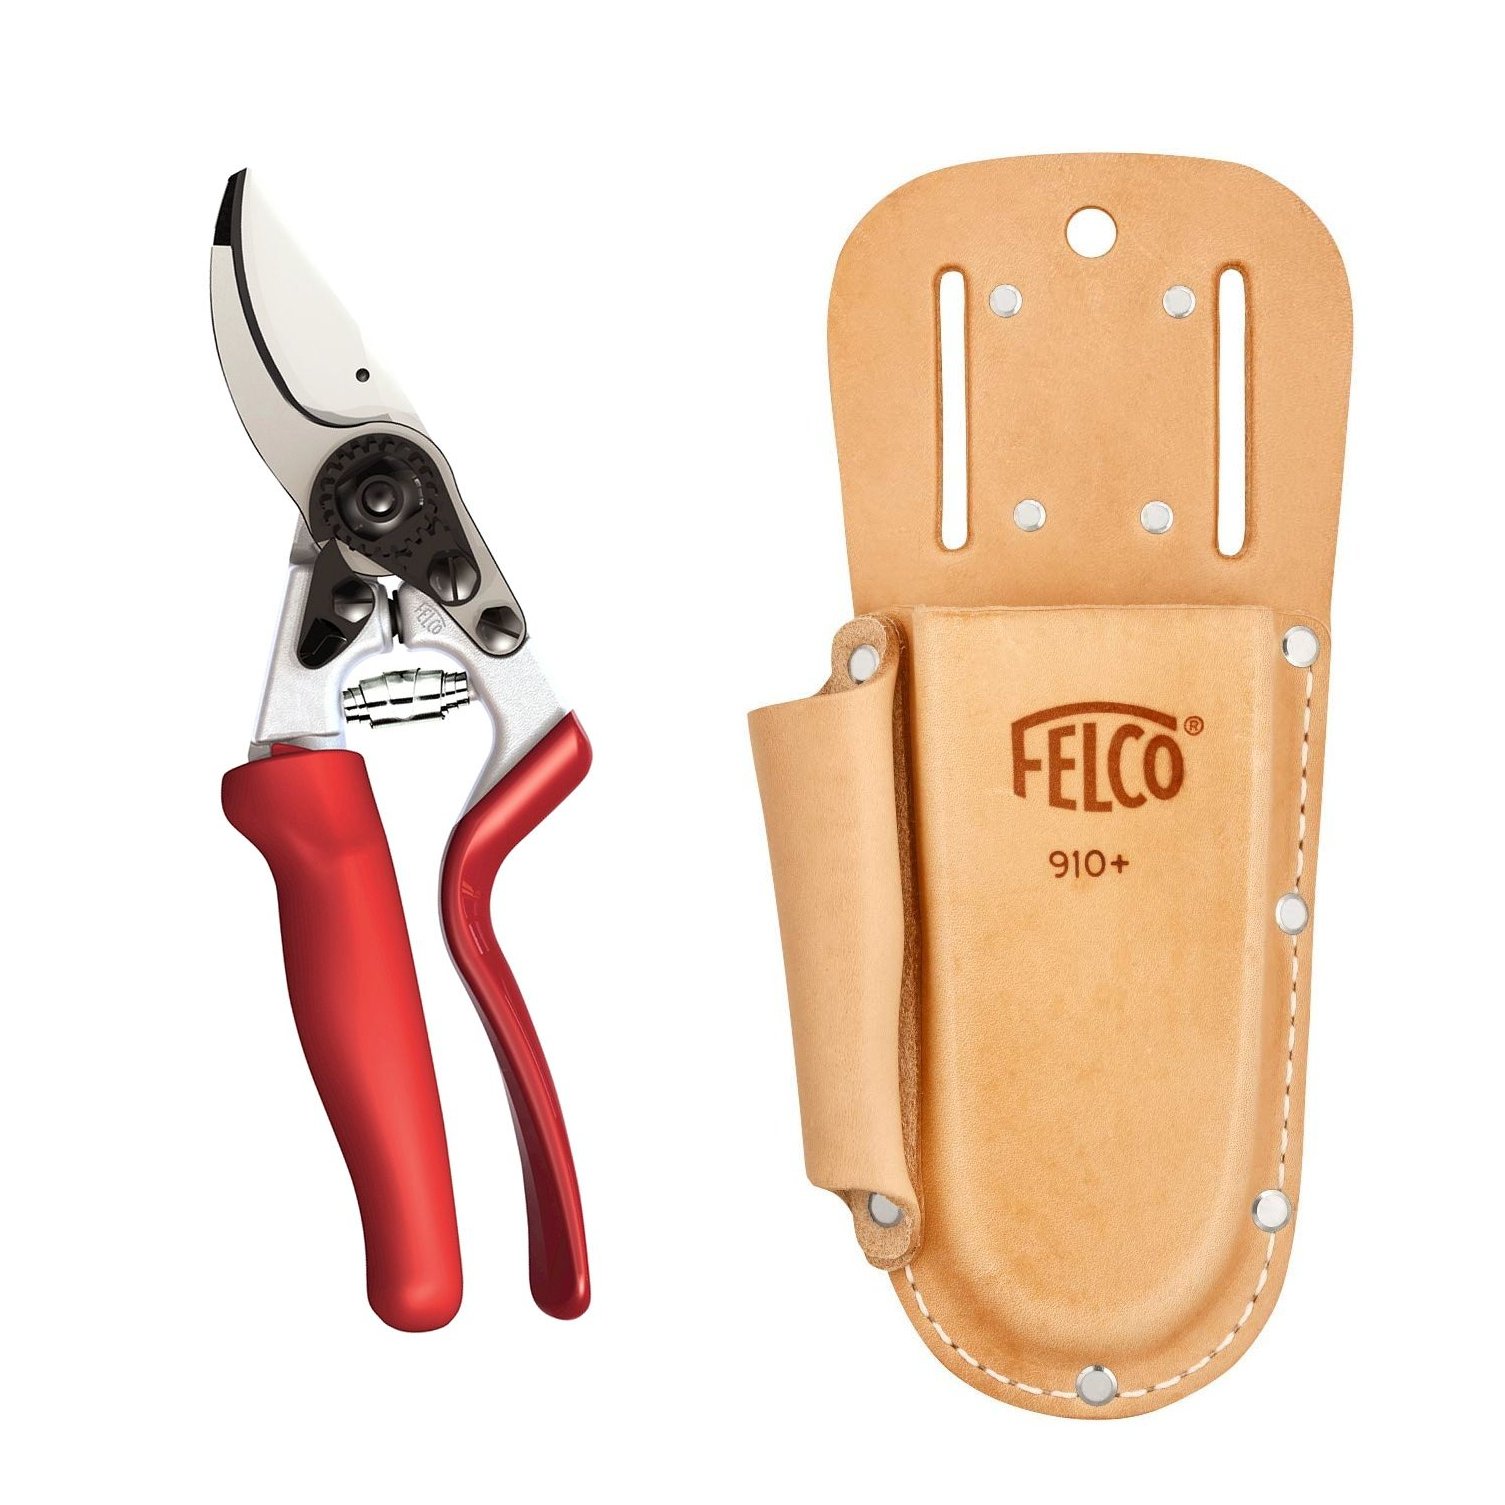 Felco Model 7 secateurs + Leather Plus holster bundle - Genuine Felco products - official Felco stockist